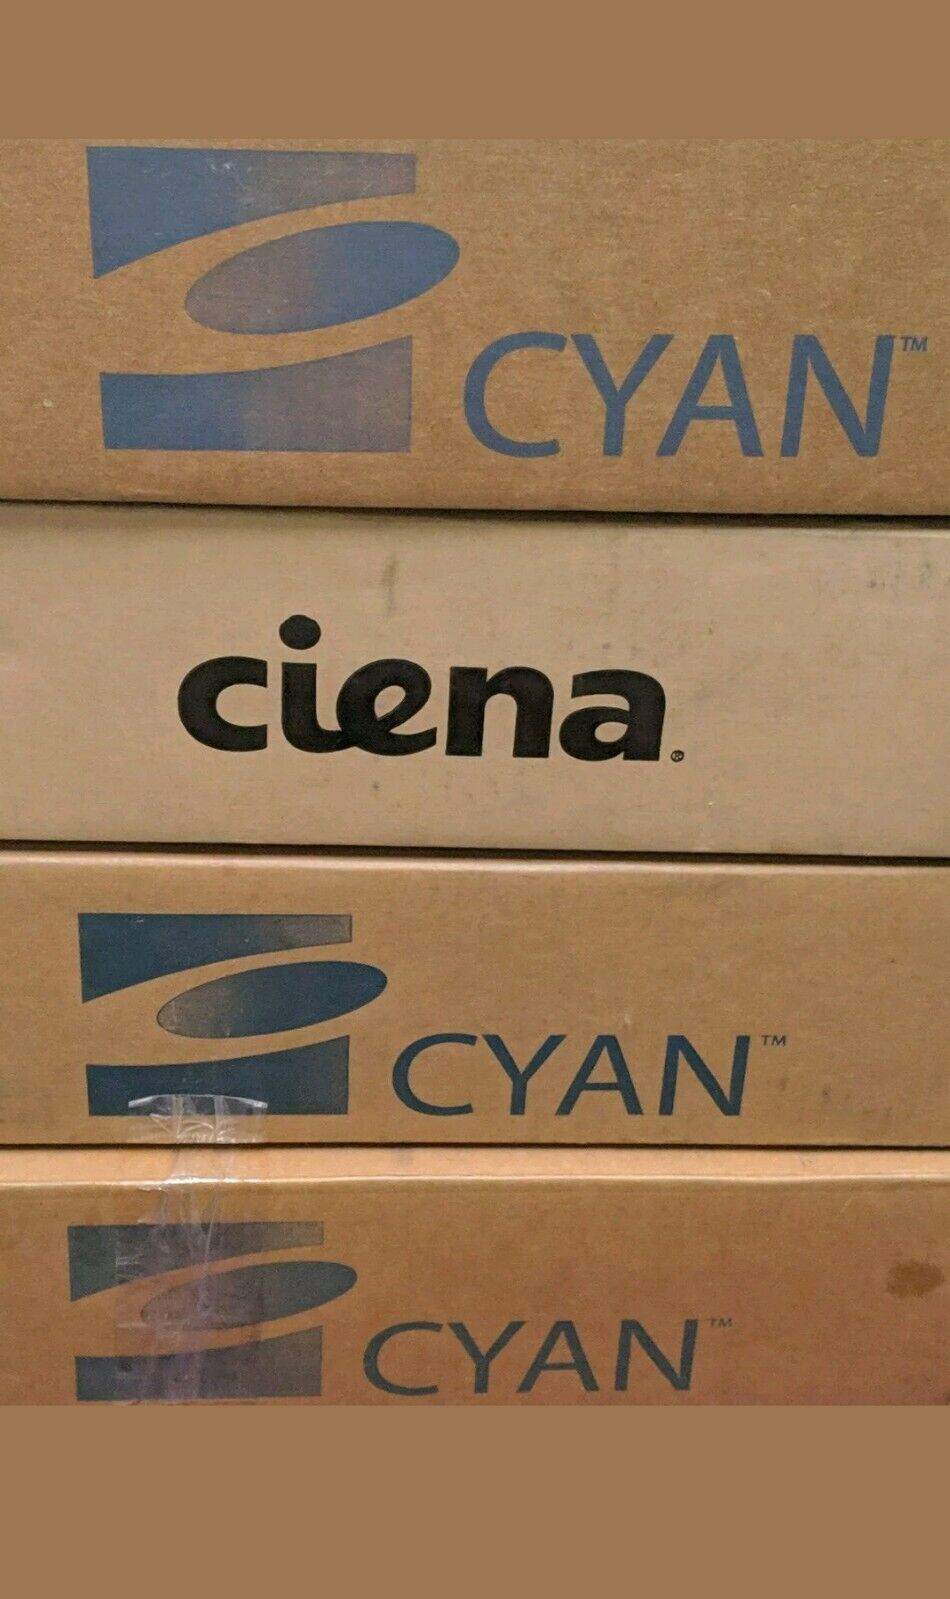 CYAN LAD-8 Ethernet Packet Switching PN 800-0020-03